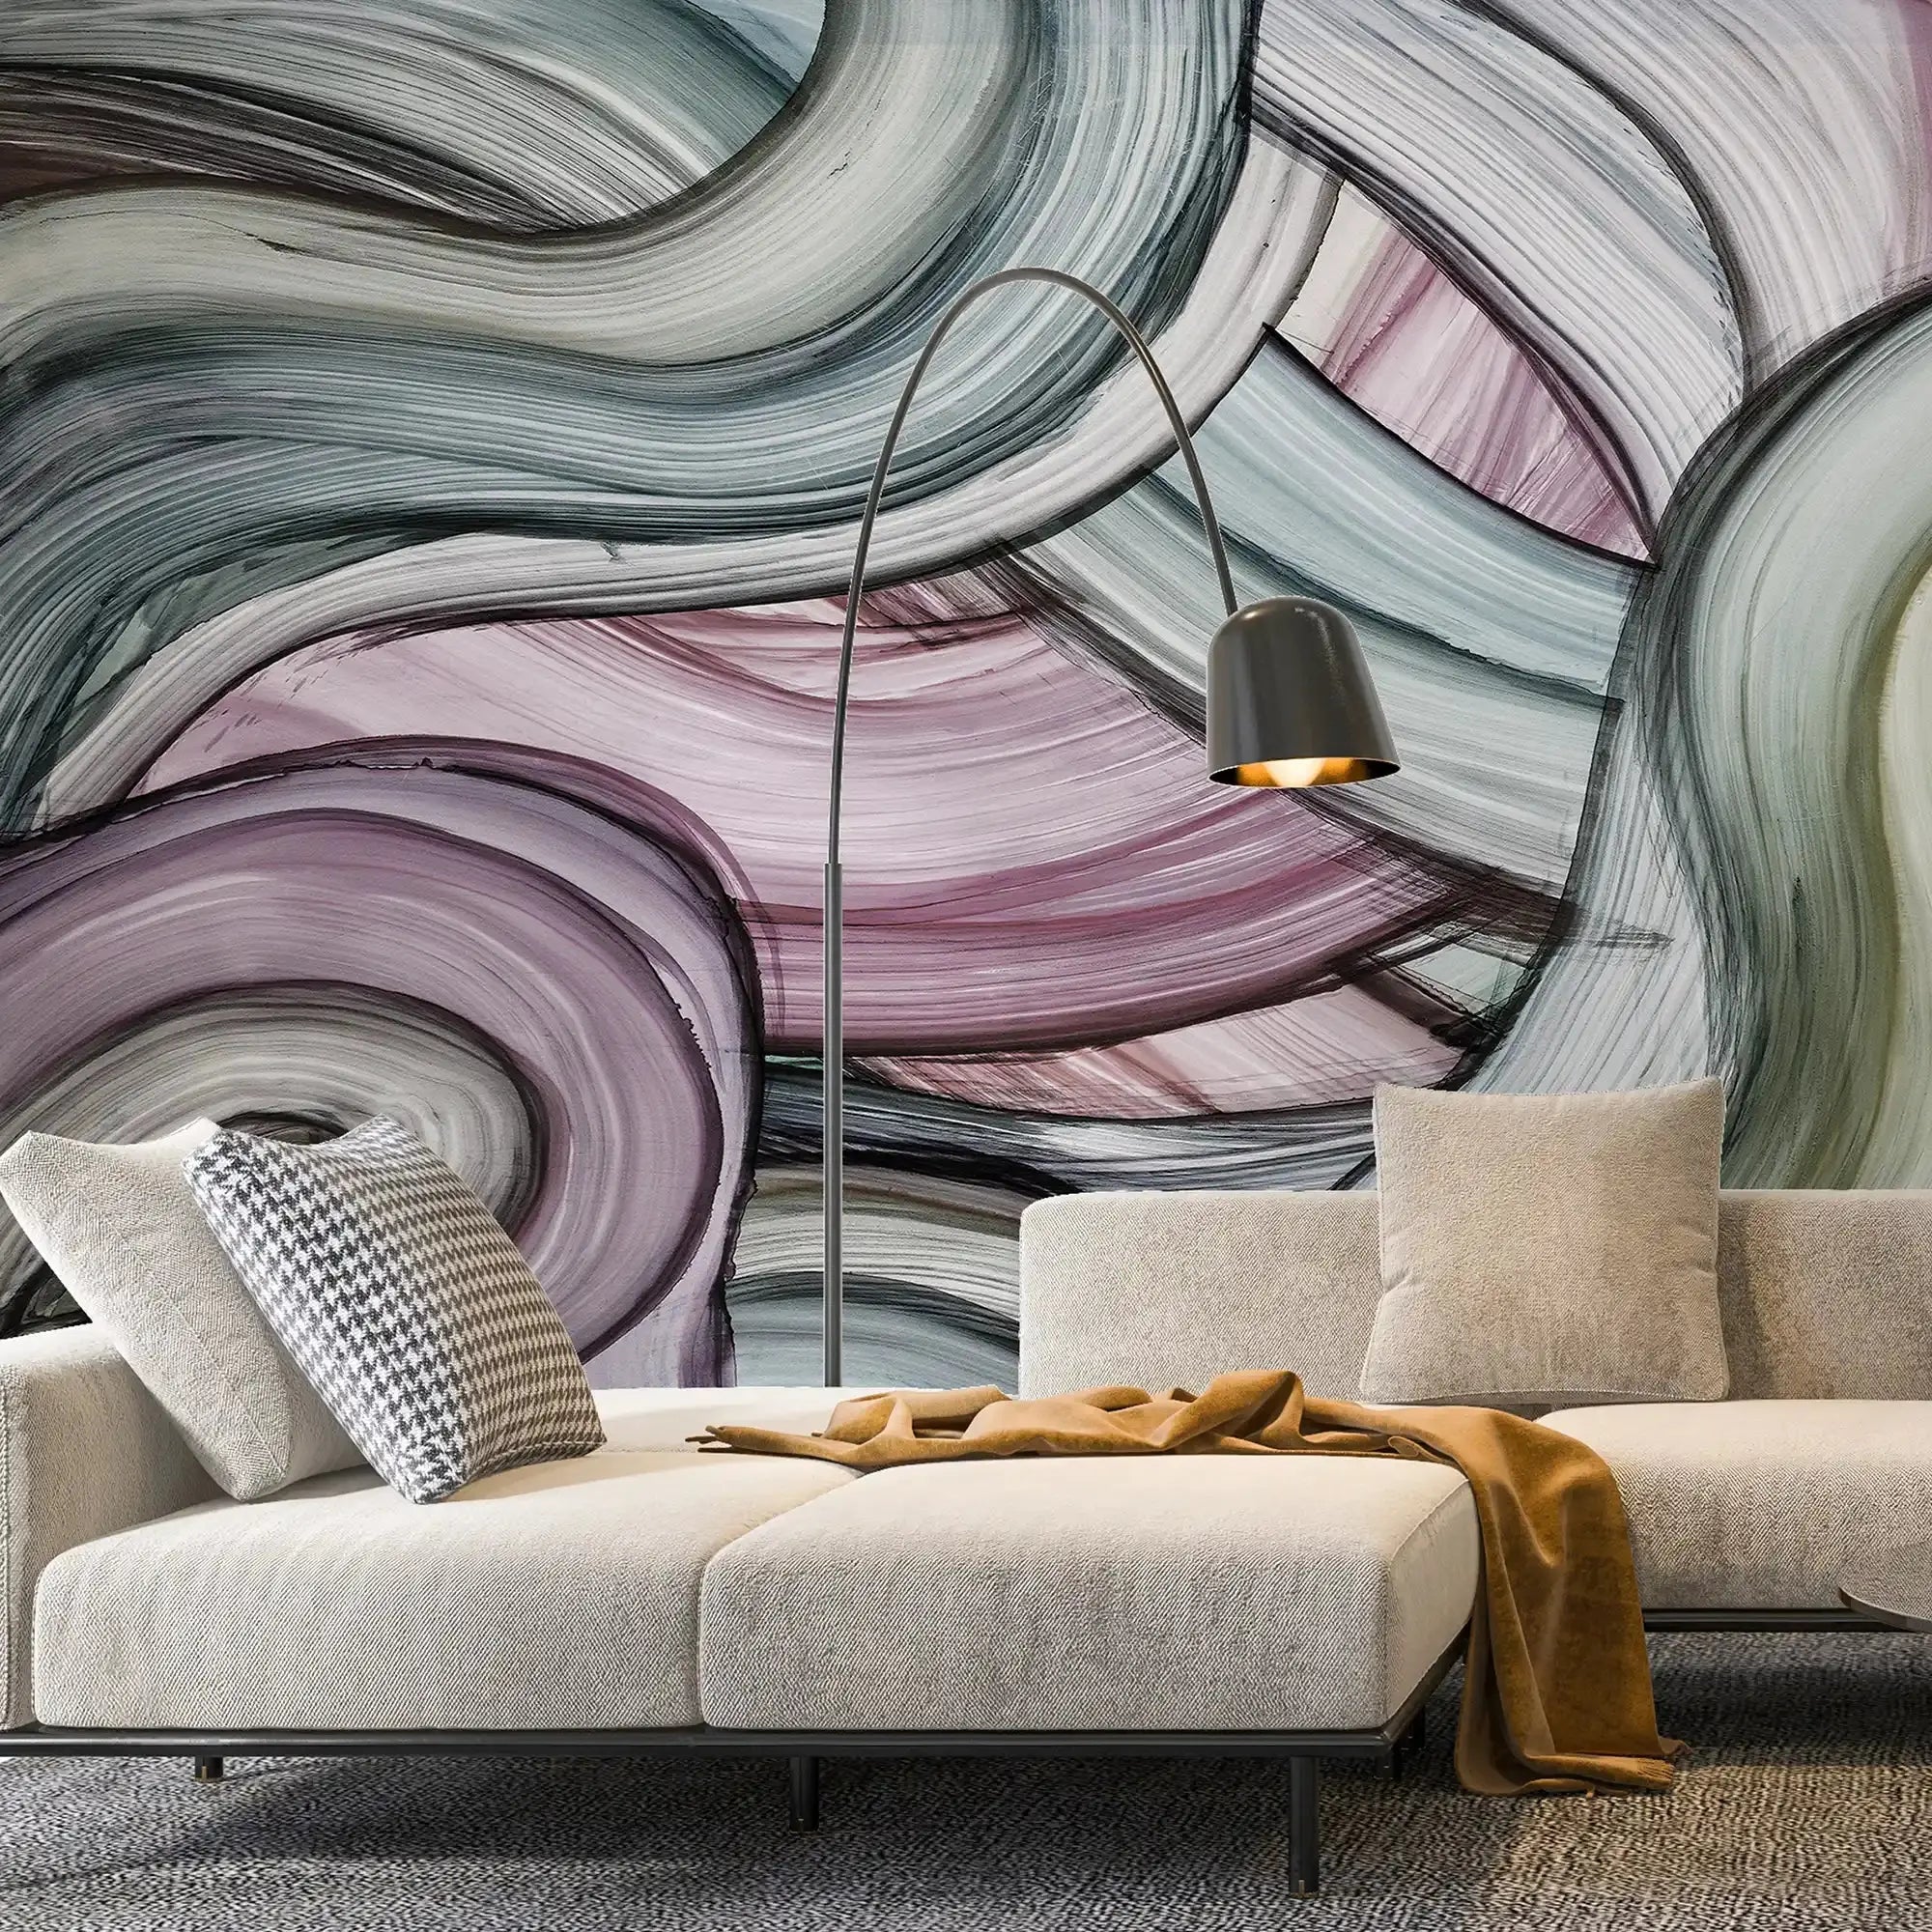 3092-B / Peelable Stickable Wallpaper with Colorful Wavy Lines - Bold, Contemporary Geometric Design for Any Room - Artevella